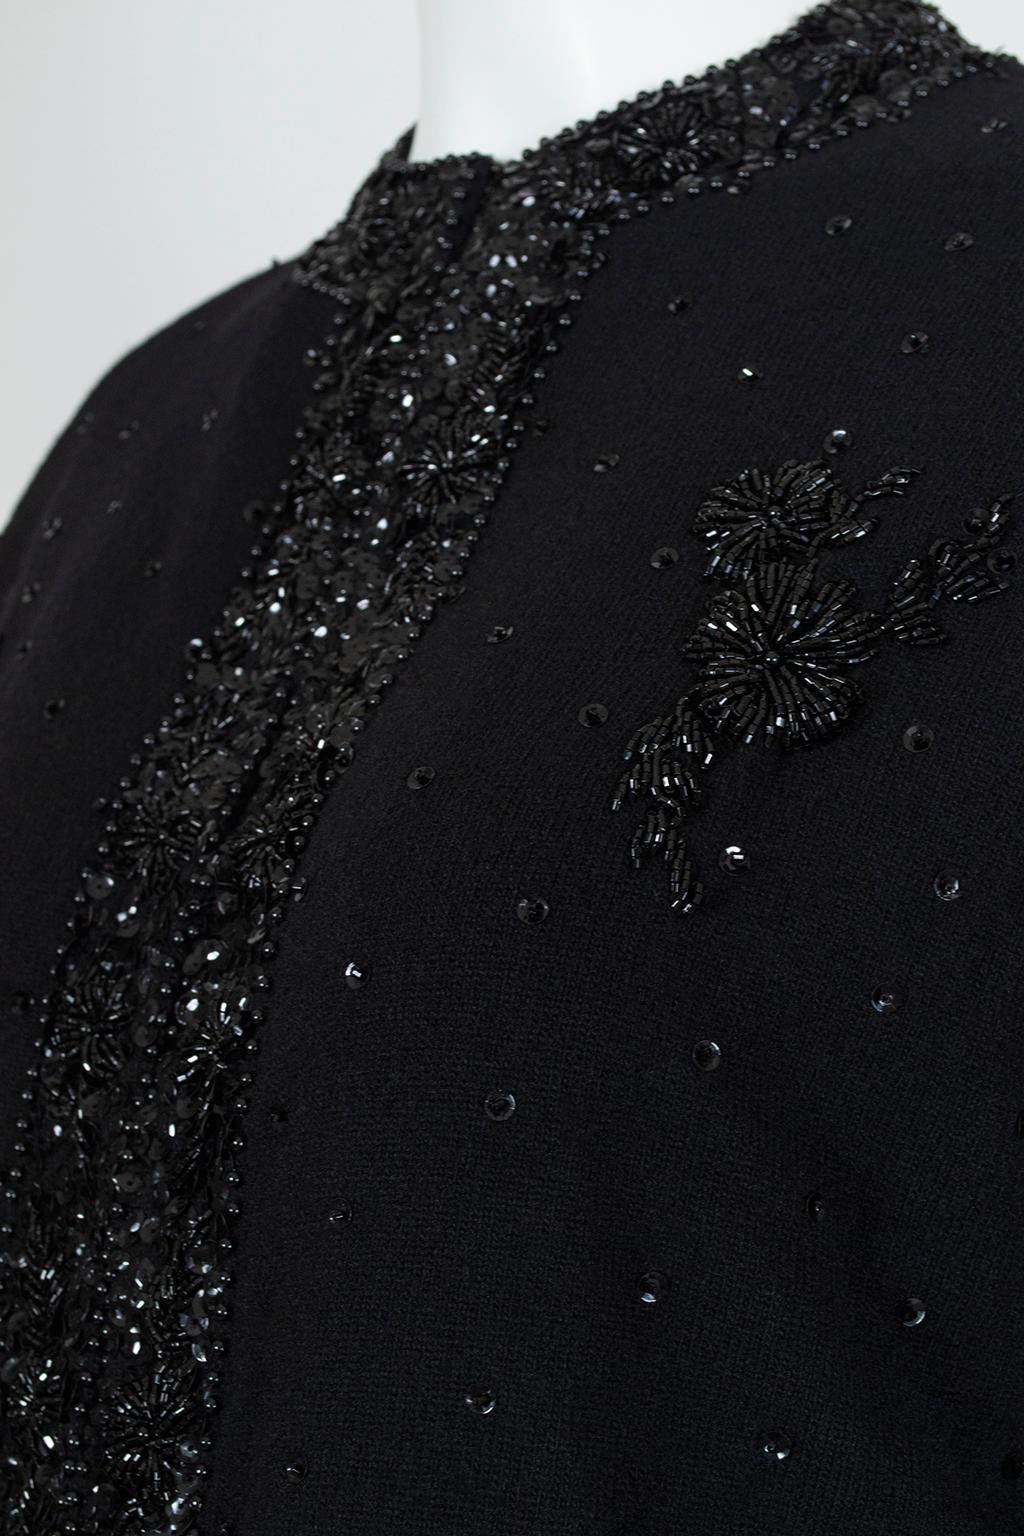 Black Angora Bead and Sequin Evening Cardigan Sweater, Hong Kong - S-M, 1950s In Excellent Condition For Sale In Tucson, AZ